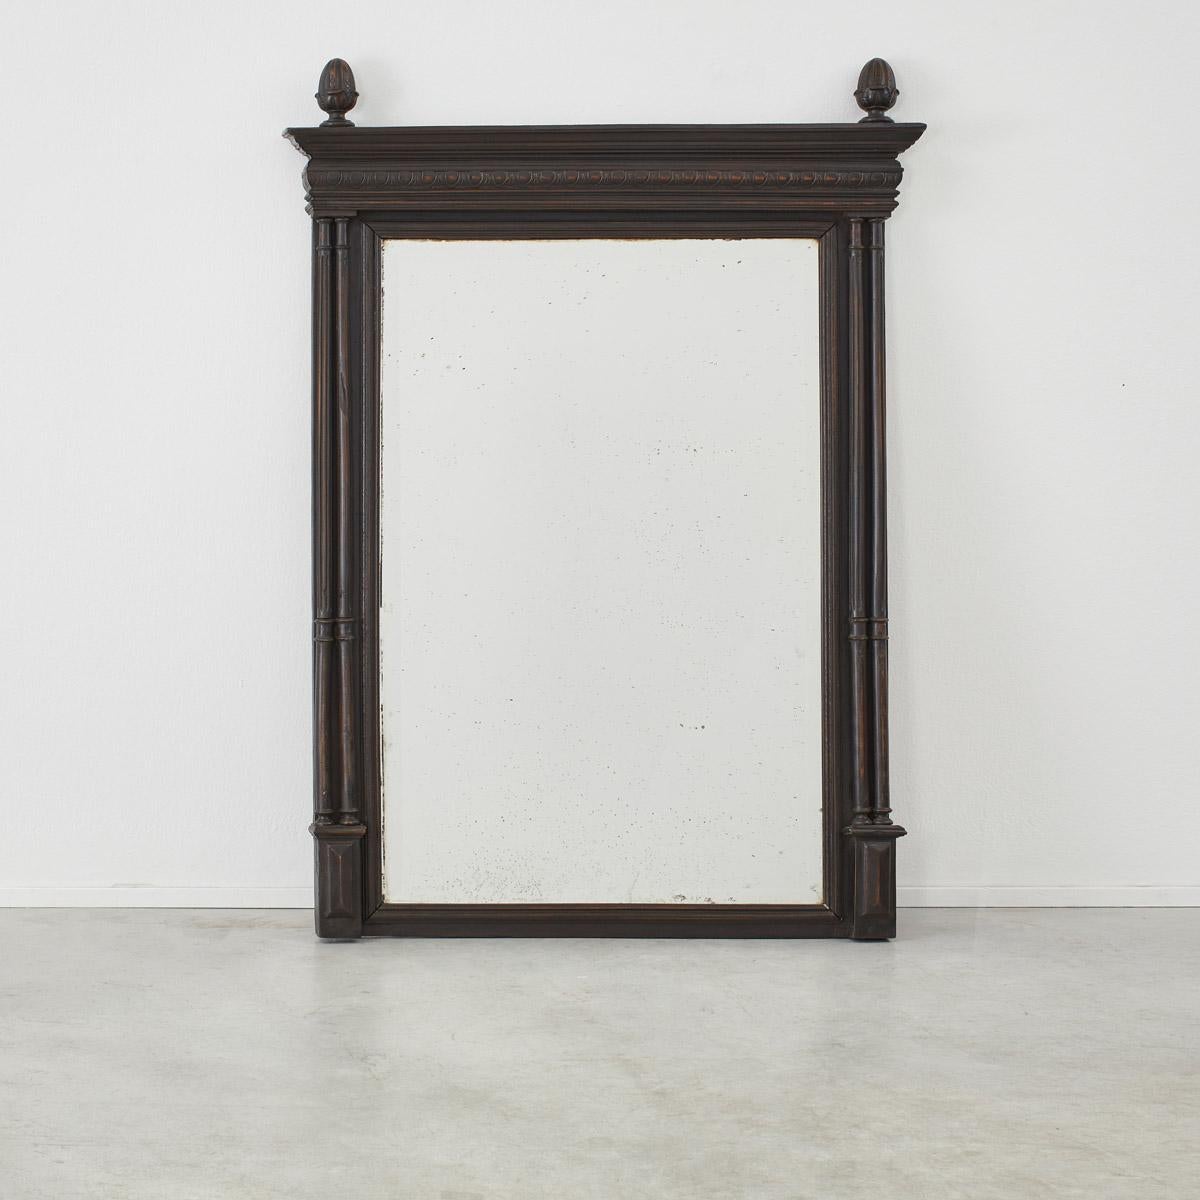 Made in France well over one hundred years ago, this large ebonised mantel mirror is intricately detailed with columns and carved embossments. The mirror’s size and bold character make it well suited to hang above a fireplace or in a hallway. 